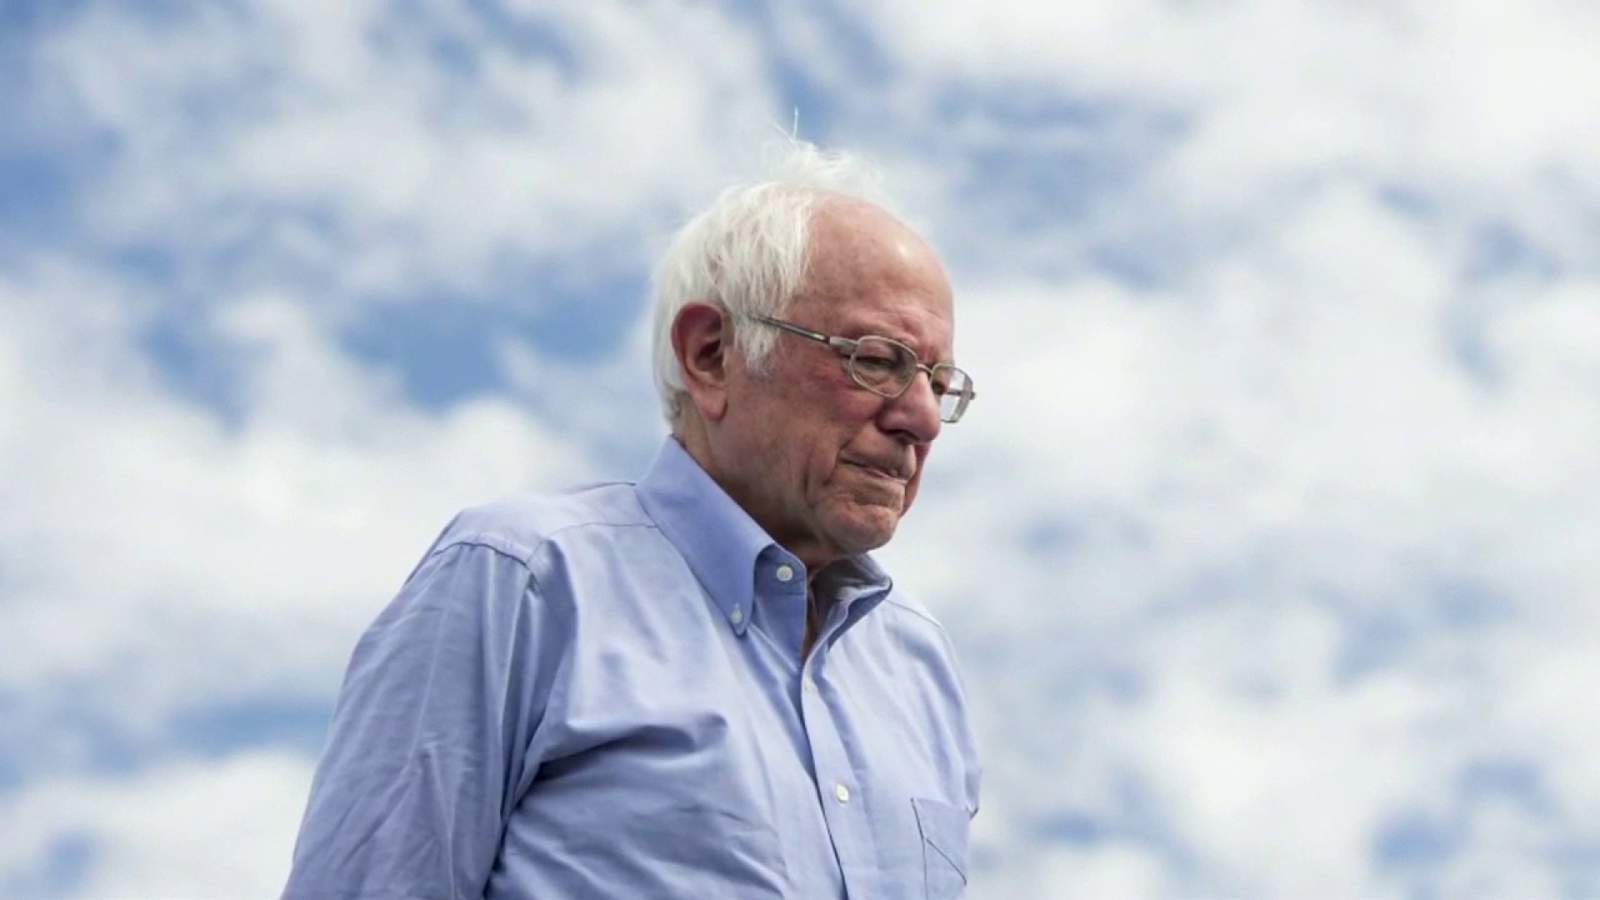 Bernie’s blunder may hurt support in South Florida